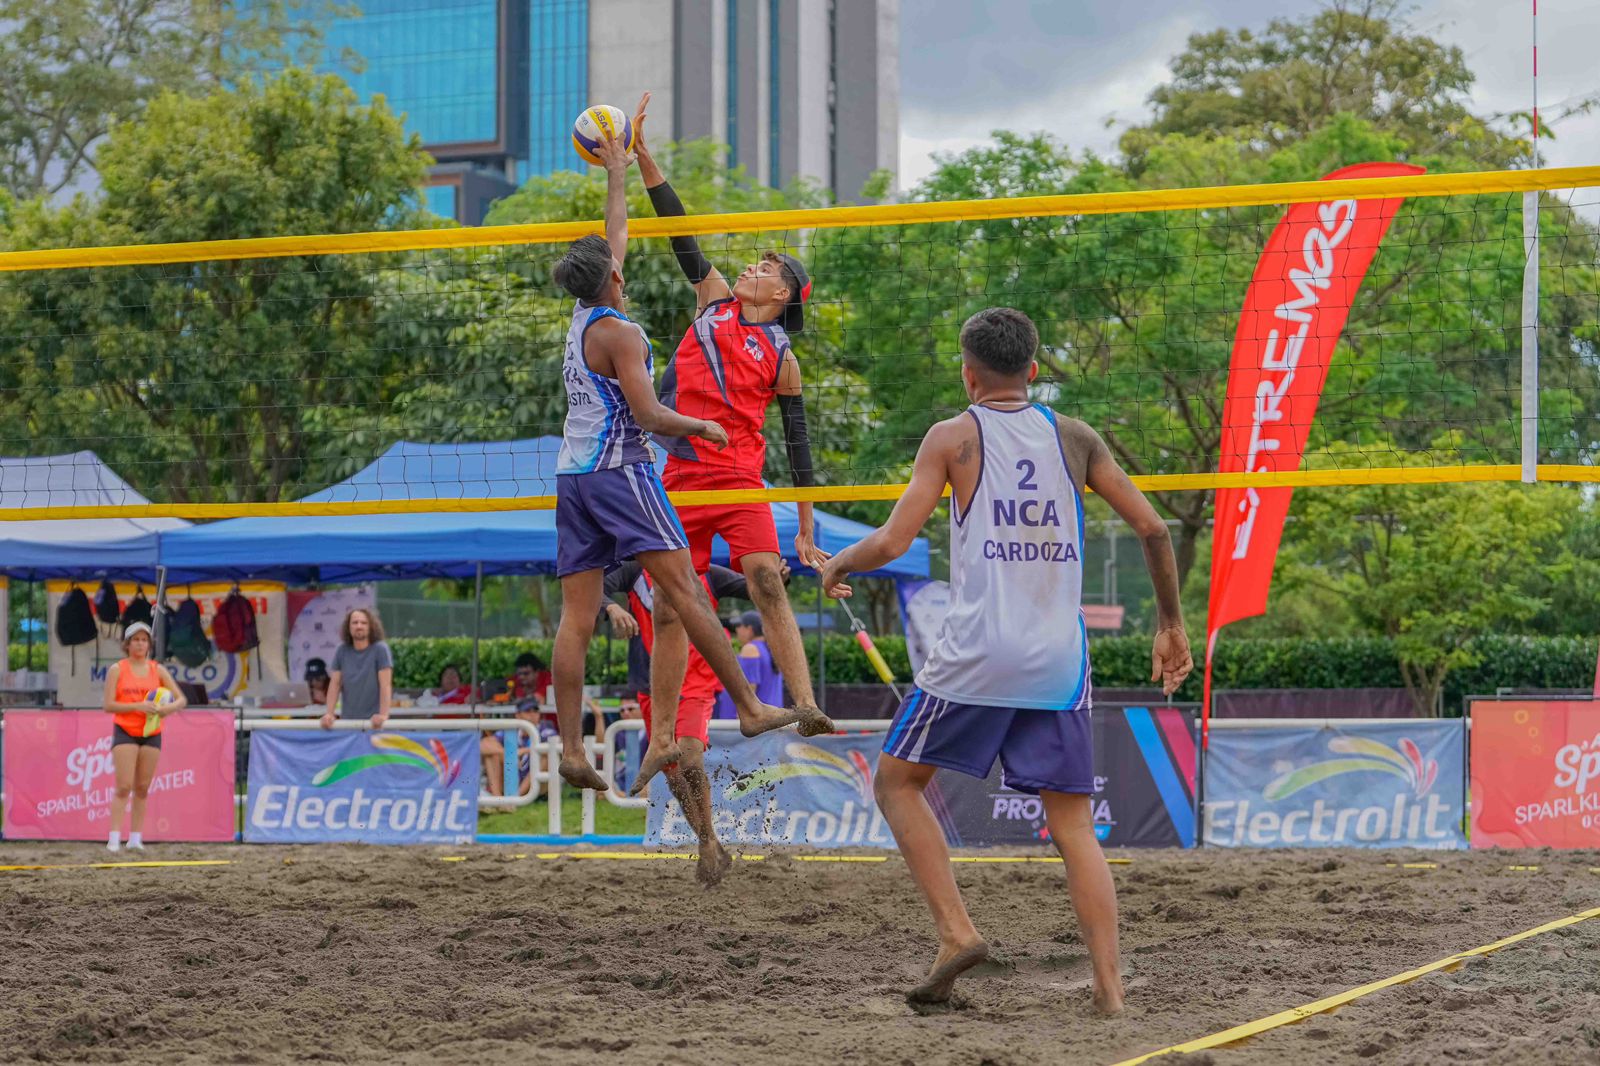 Nicaragua women and Costa Rica men lead on day one at U17 Central American Championship in Costa Rica